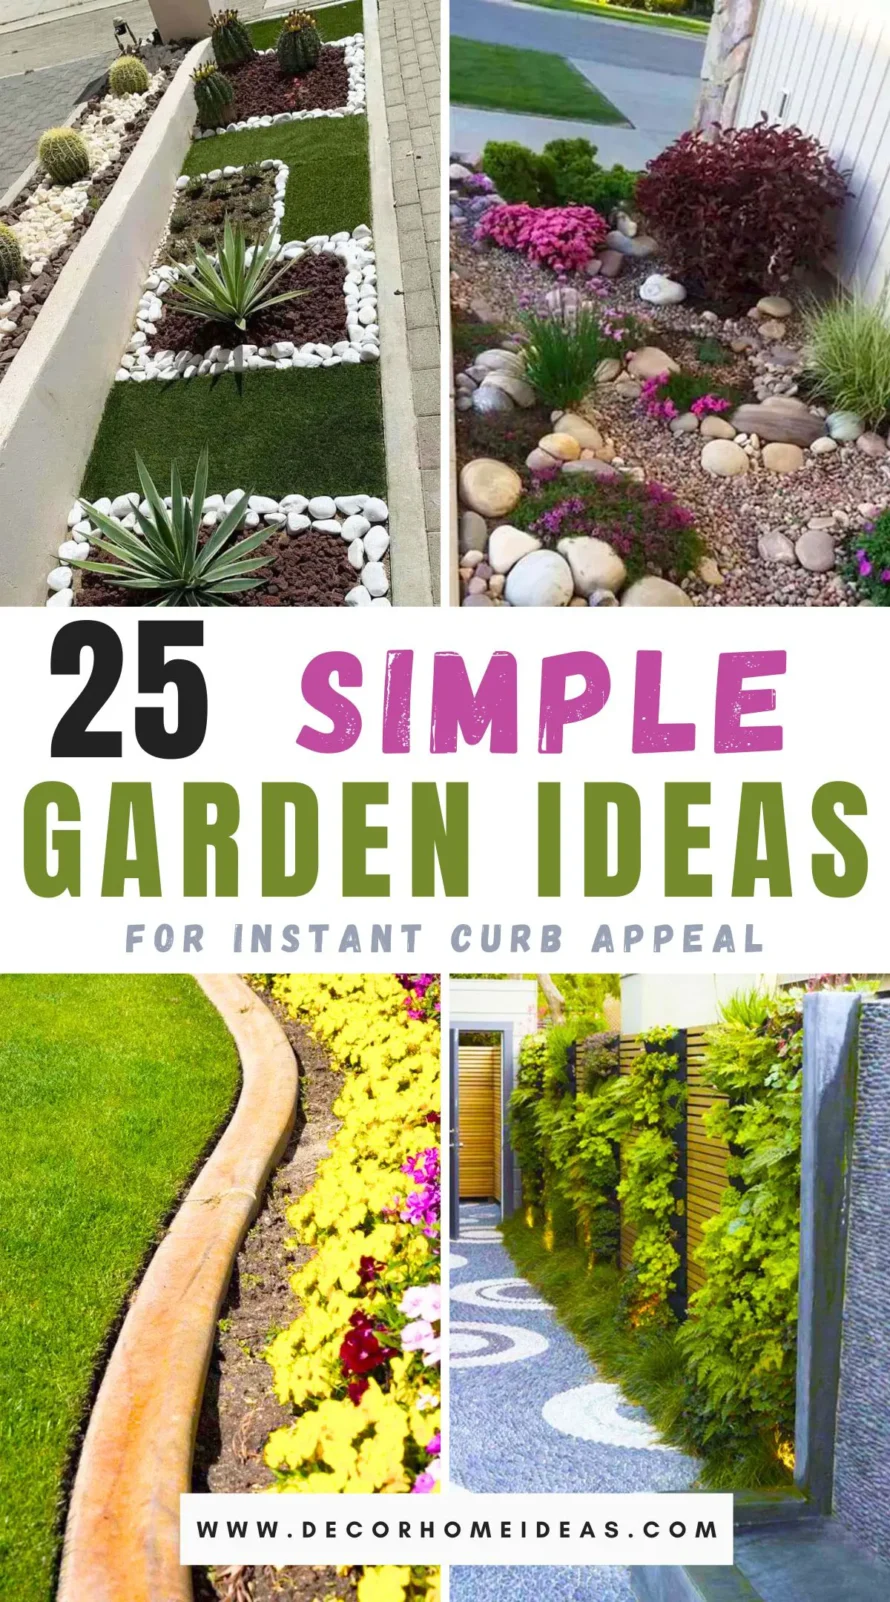 Discover 25 easy, stylish garden makeover ideas that boost curb appeal. Transform your front yard into a captivating oasis that turns heads!